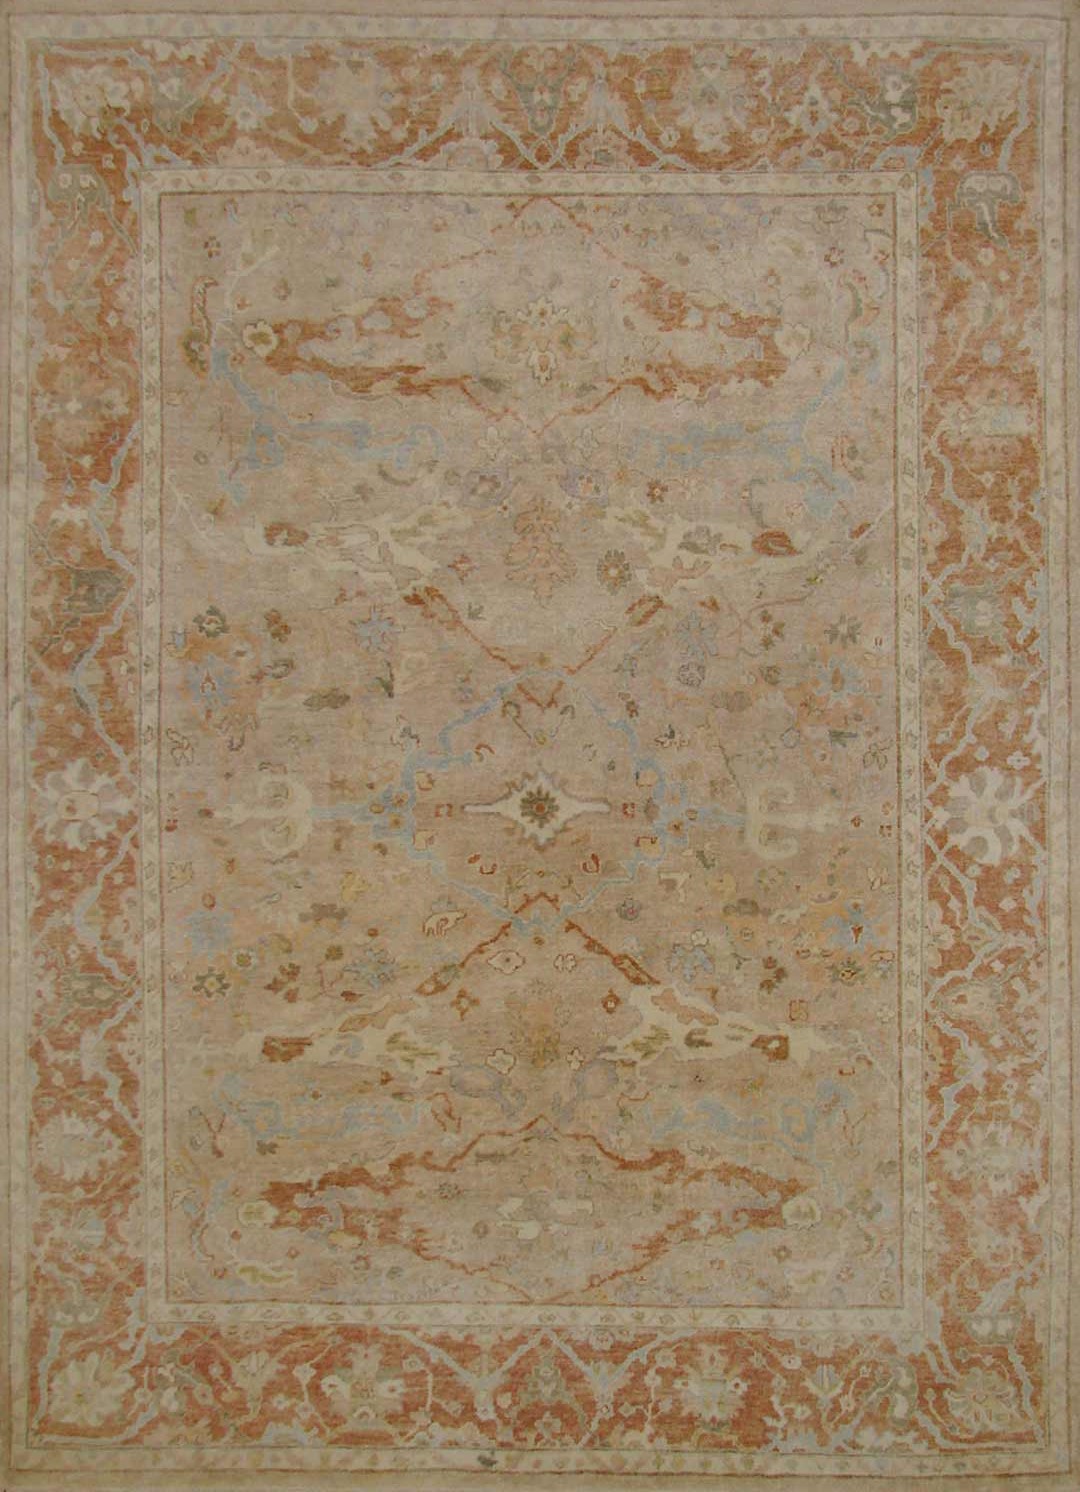 Buy F.T.KNOT Camel ODR Exclusive Hand Knoted Oushak Rug at Oriental Designer Rugs